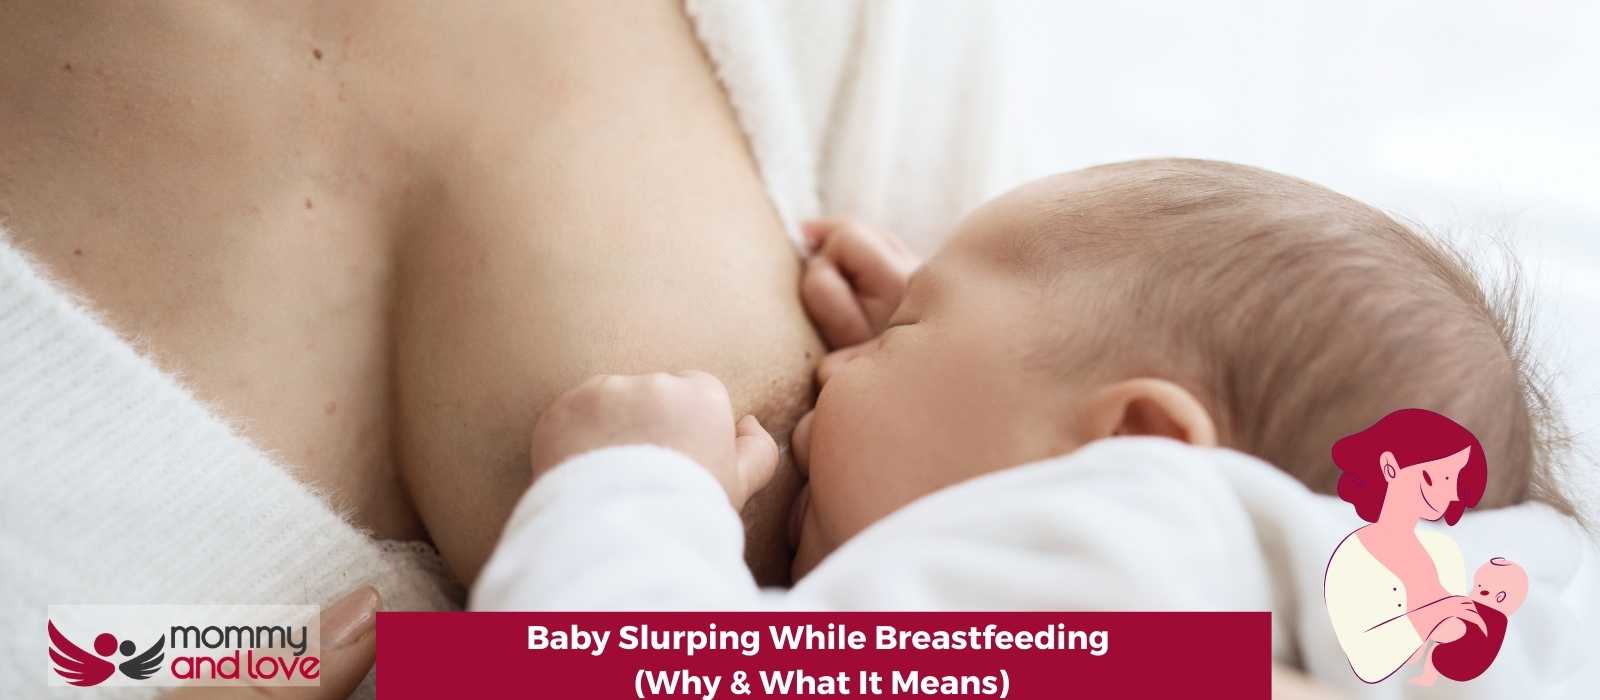 Baby Slurping While Breastfeeding (Why & What It Means)